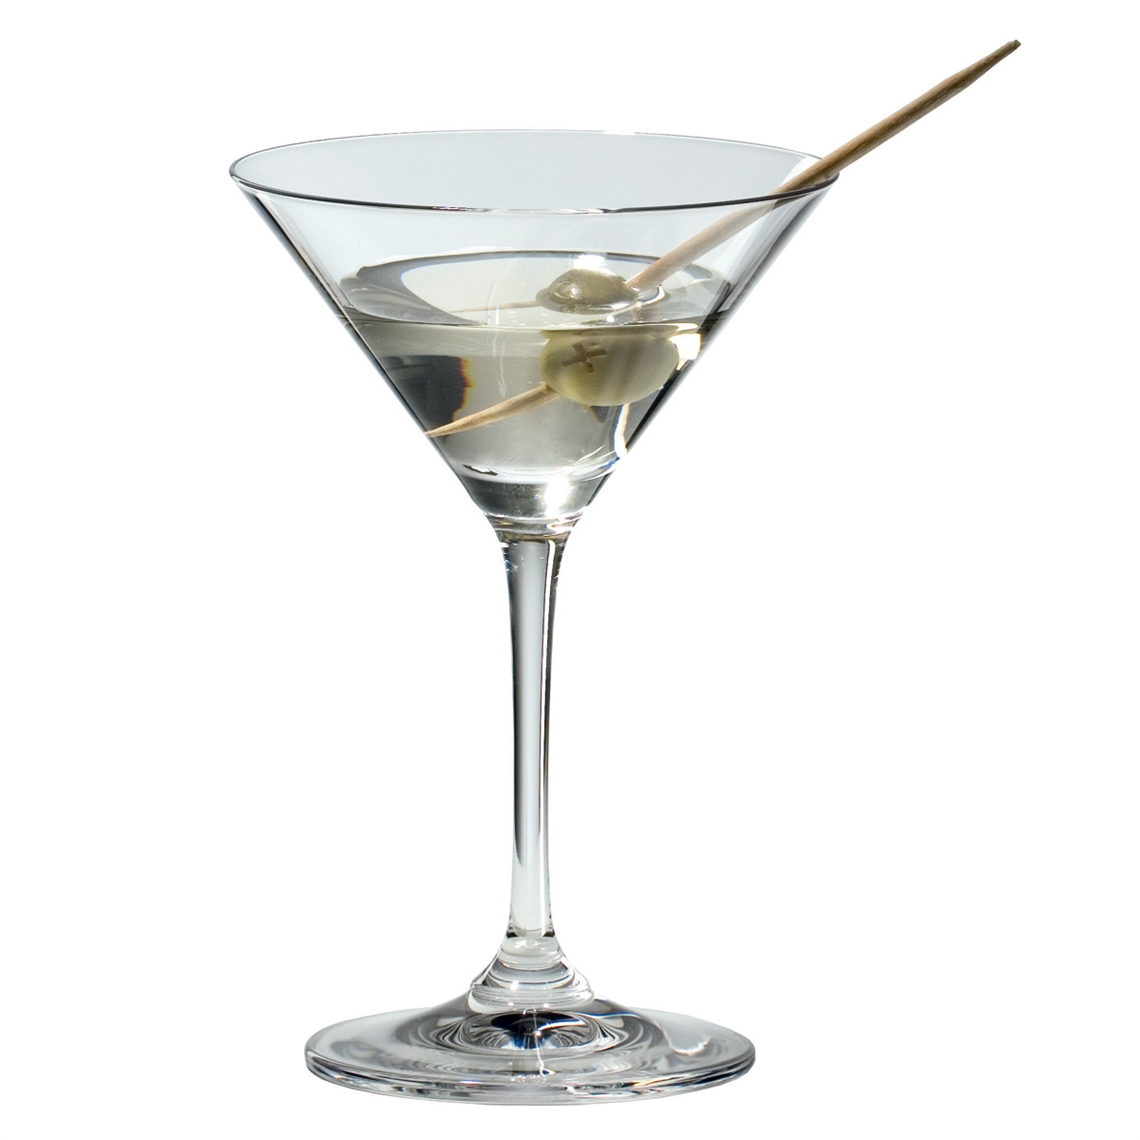 View more riedel from our Martini Glasses range